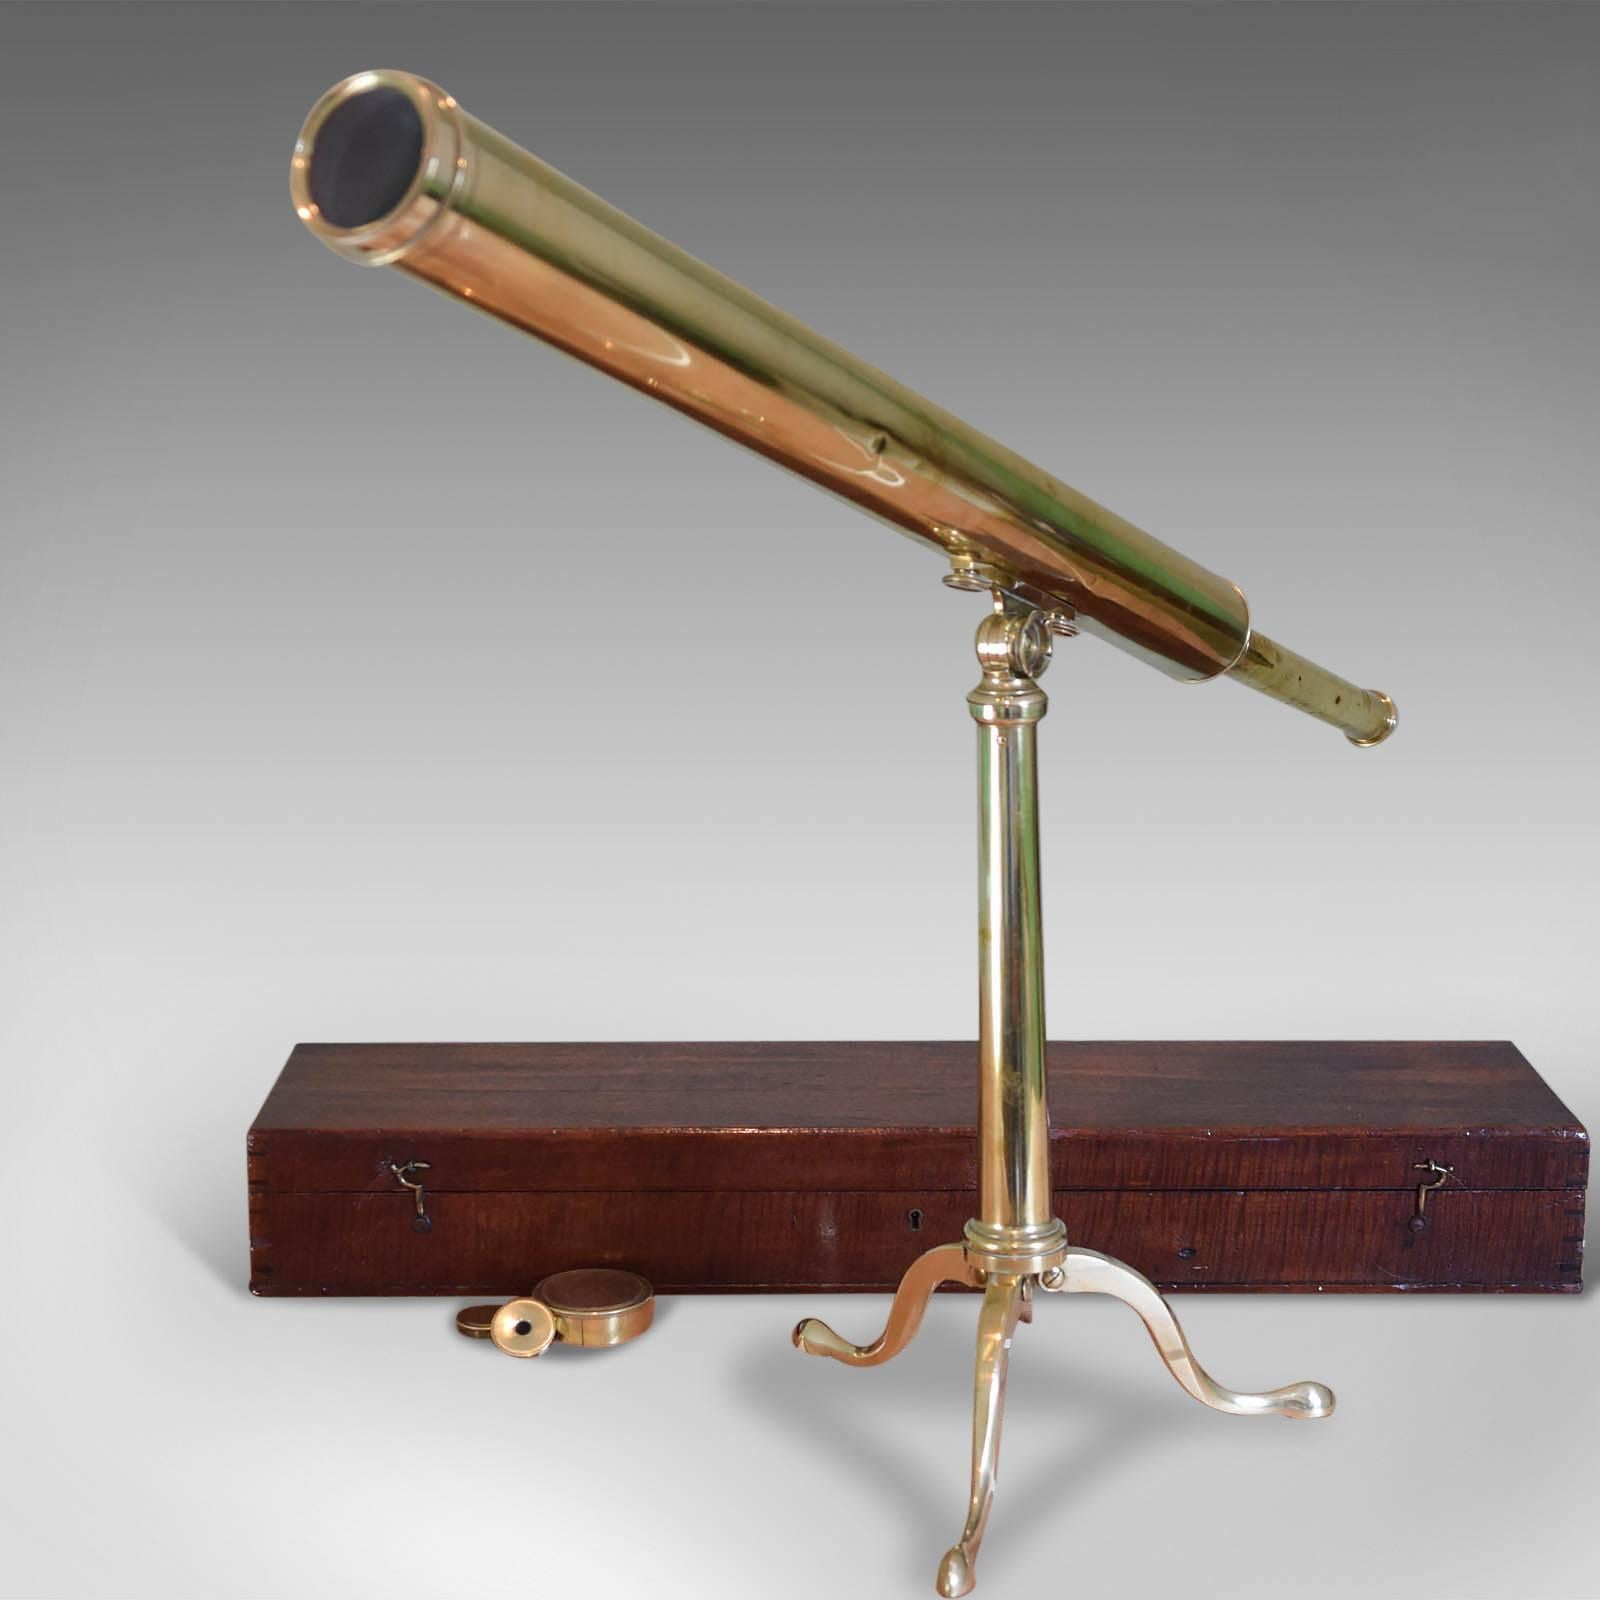 Our Stock # R0667

This is an antique telescope in mahogany case dating to circa 1800 by renowned optical instrument maker Dollond.

Clear sharp optics with 2